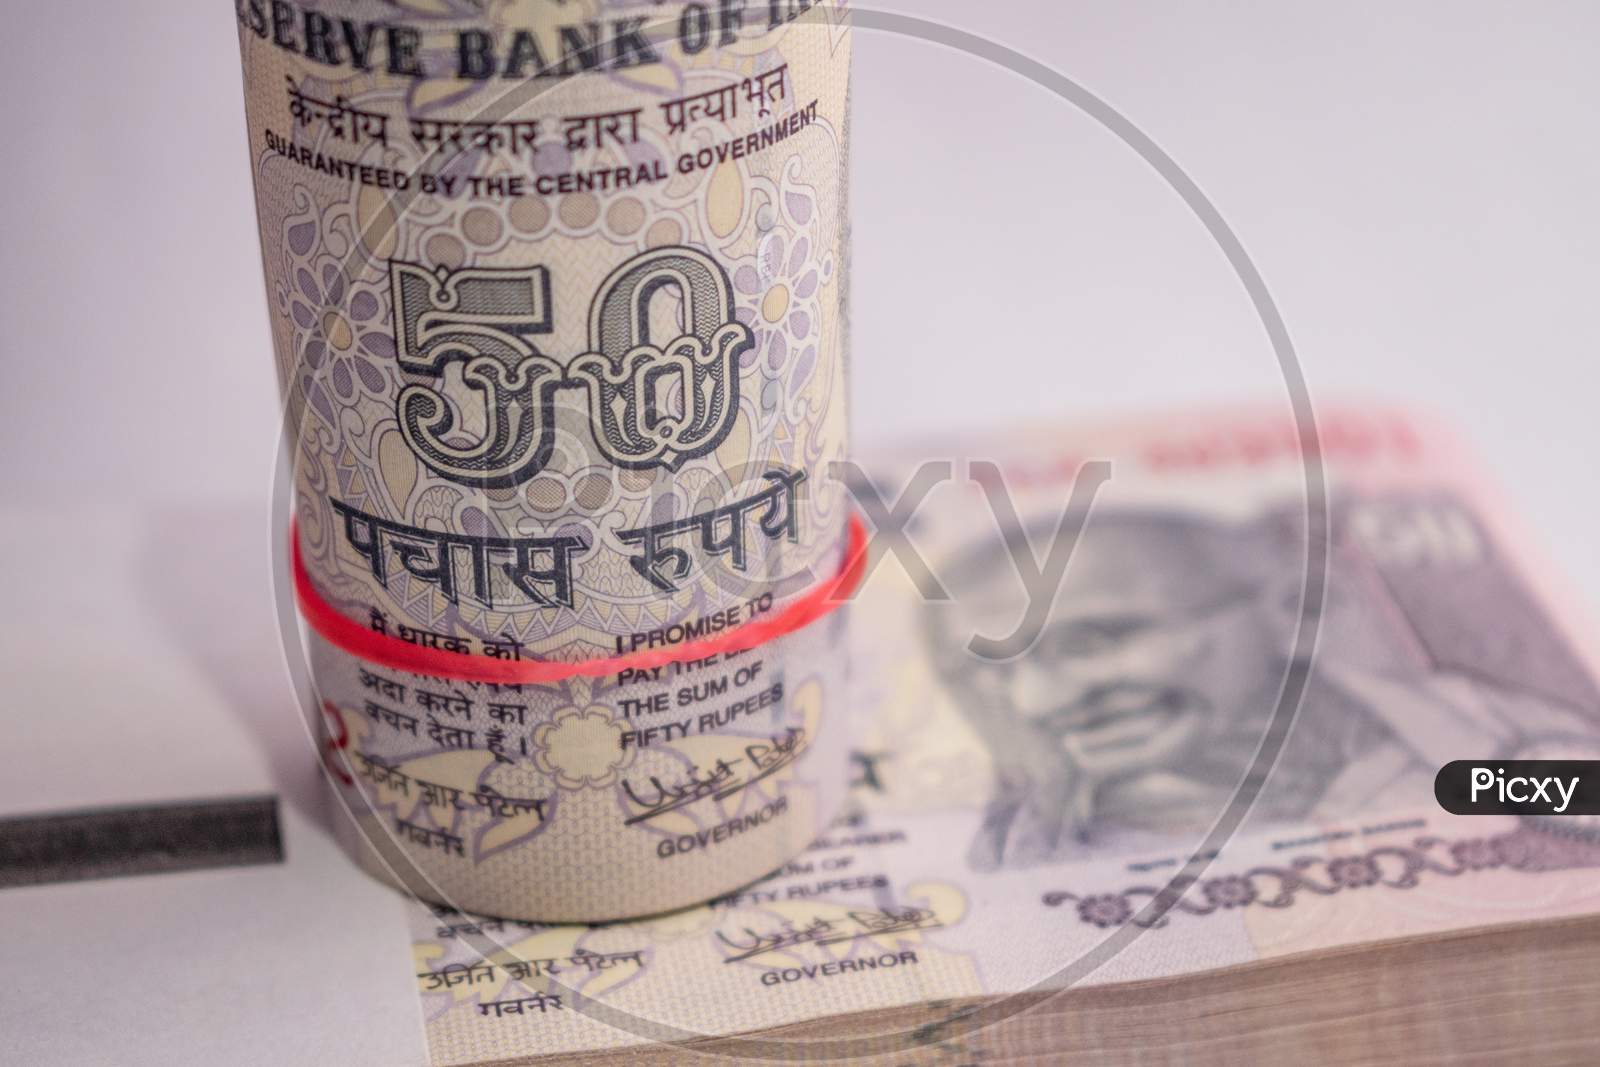 Roll of Indian currency notes of 50 rupees put on the bundle of notes